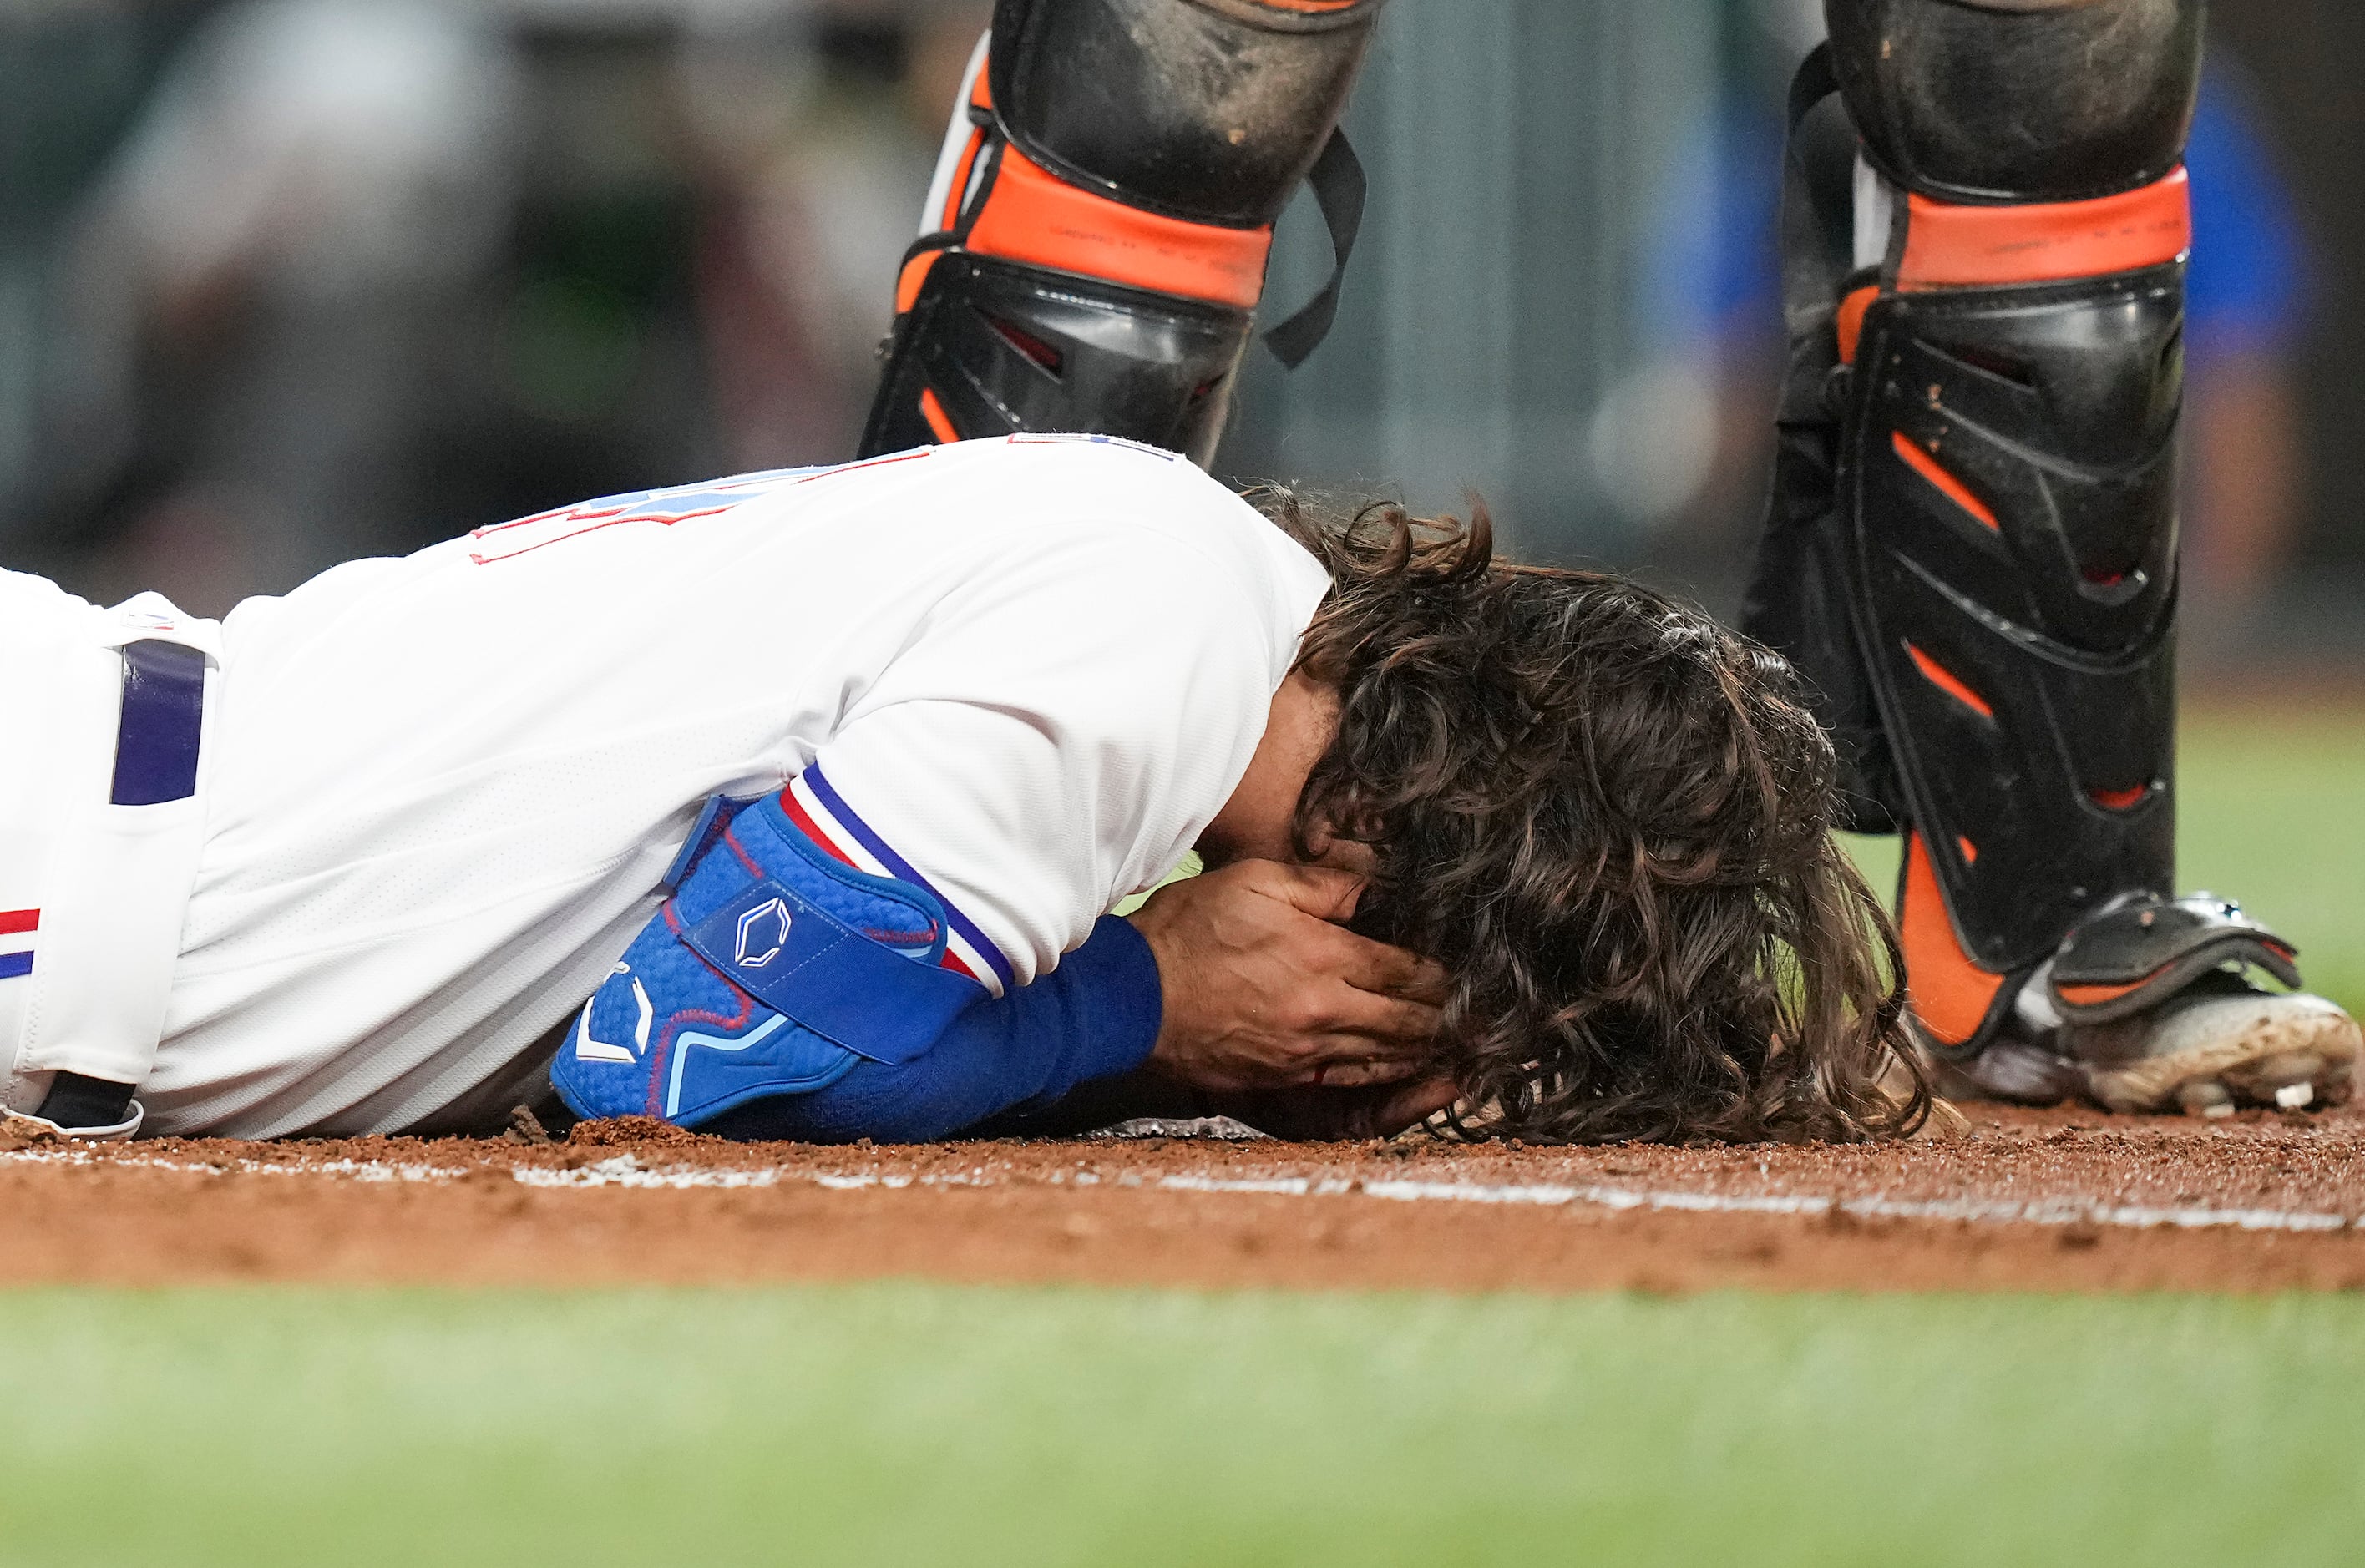 Watch: Rangers OF Josh Smith exits game vs. Orioles after being hit